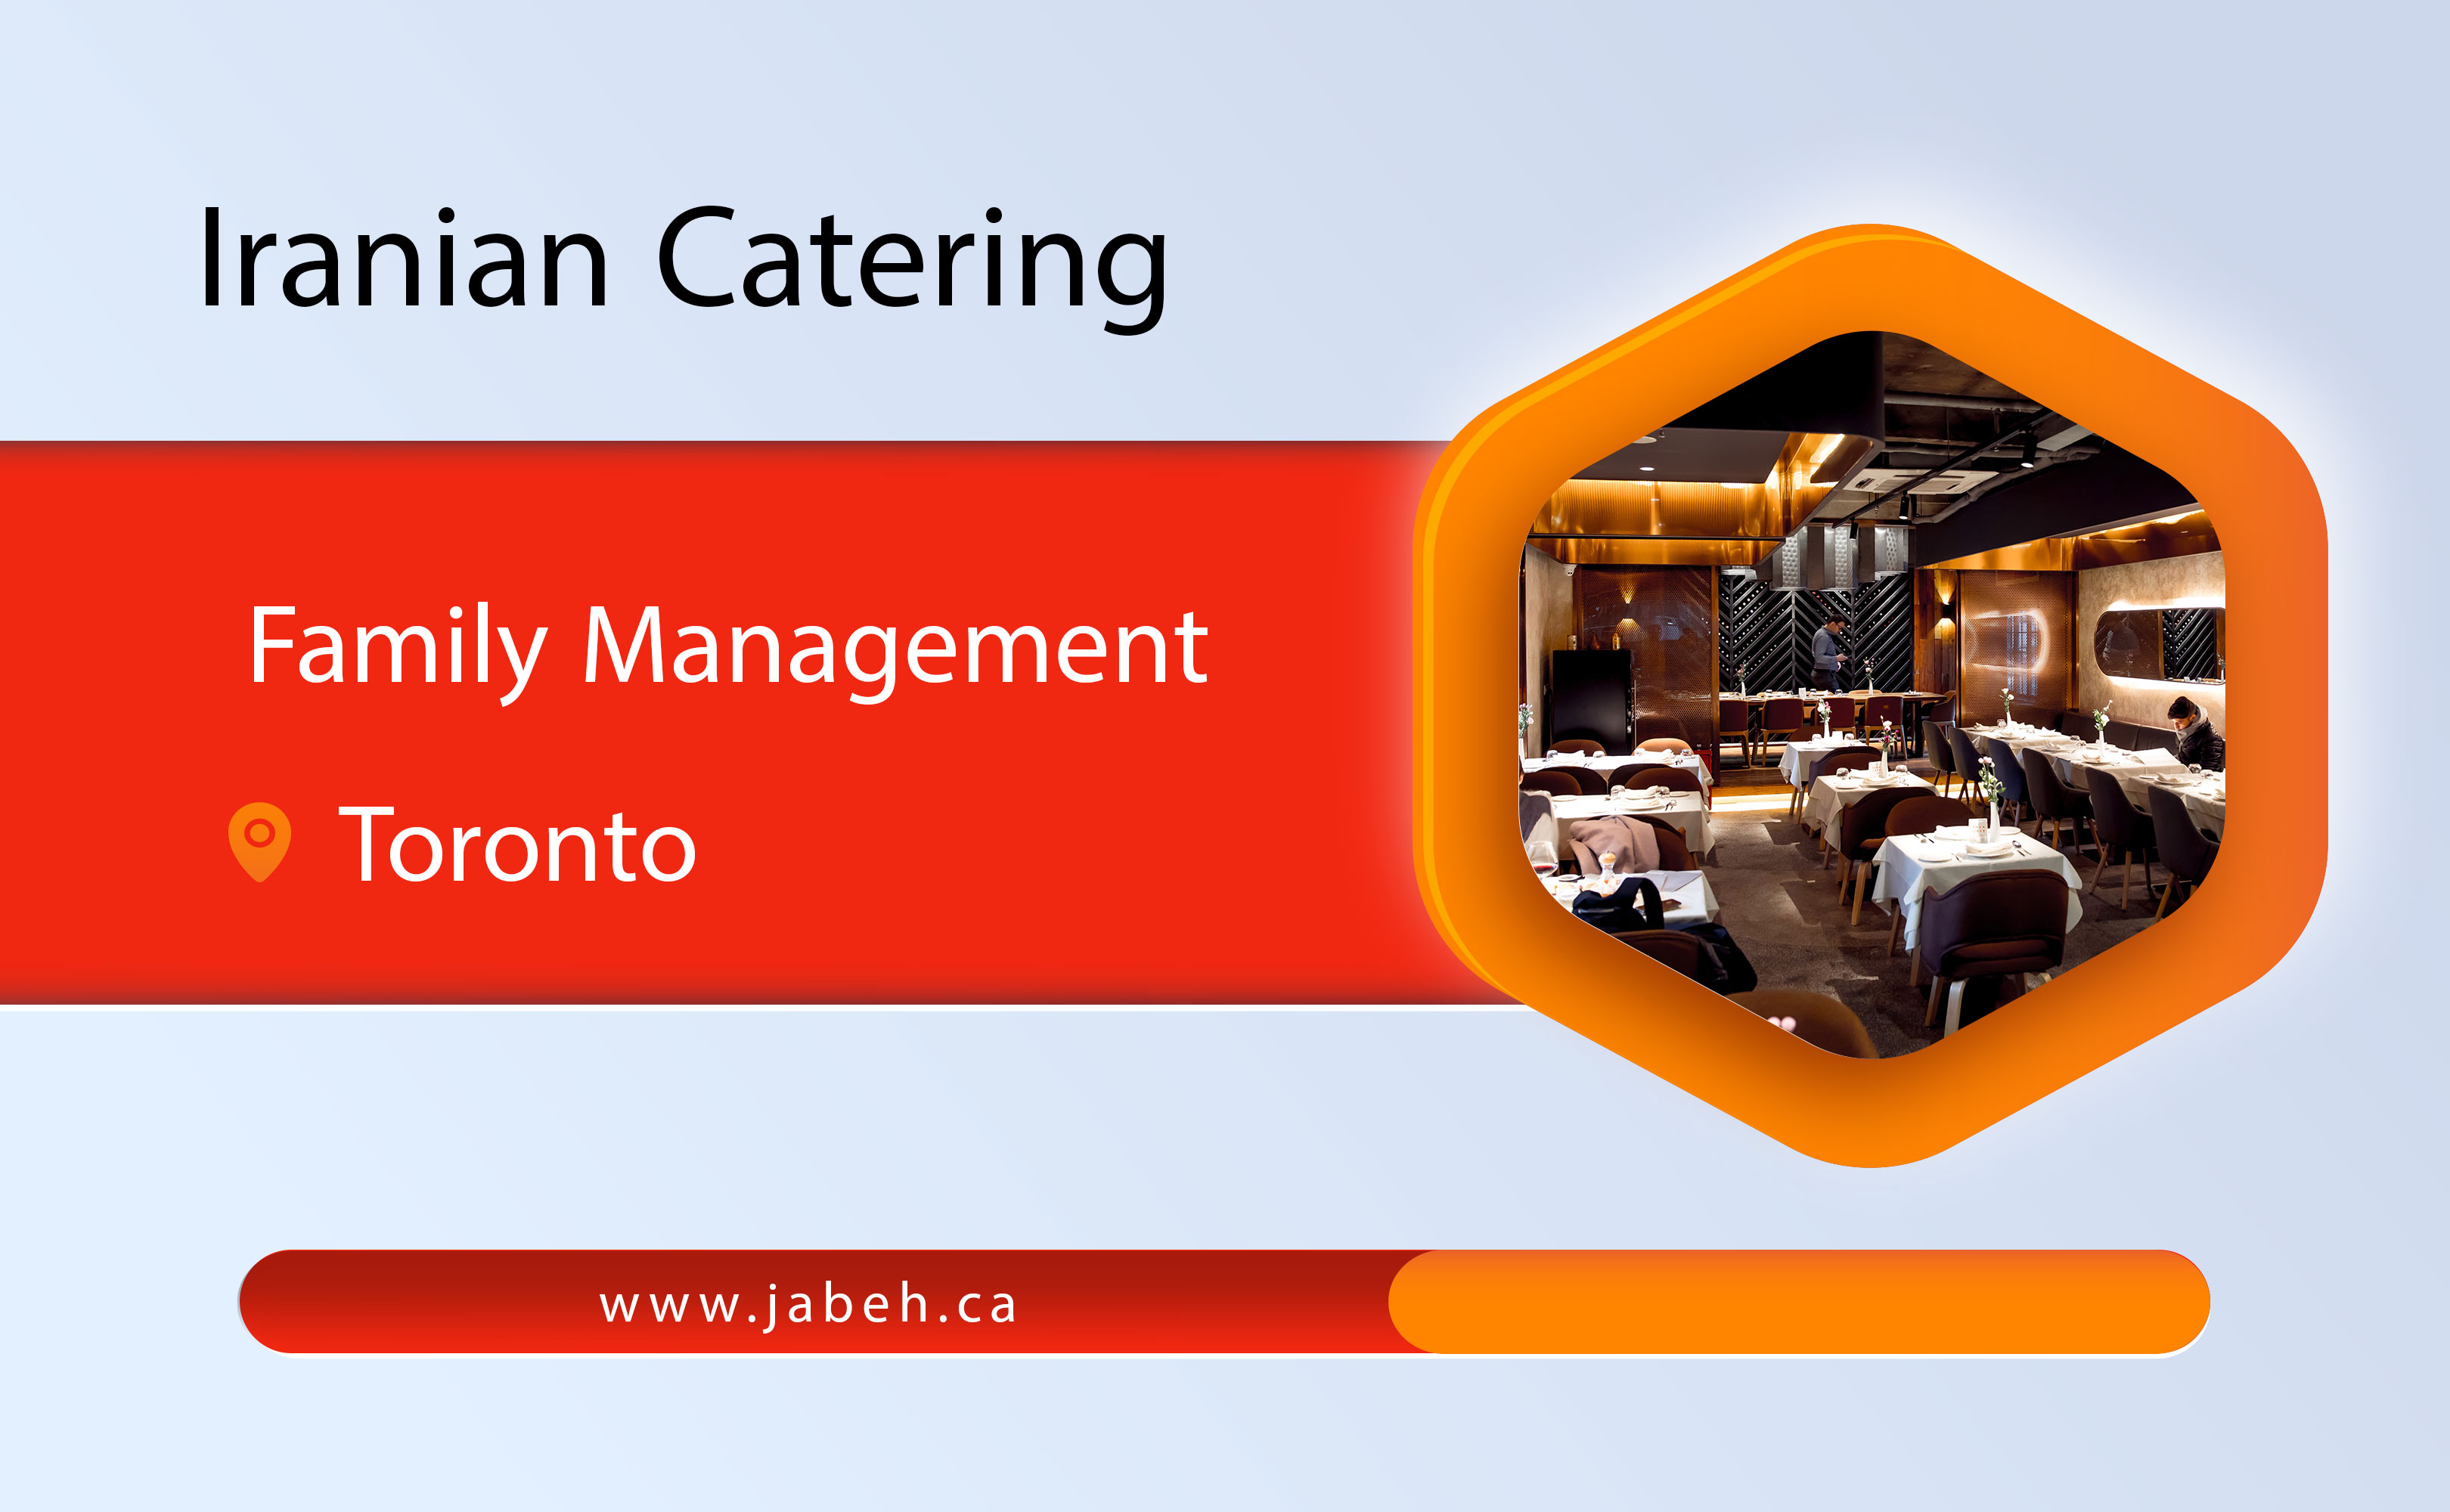 Iranian catering family management in Toronto